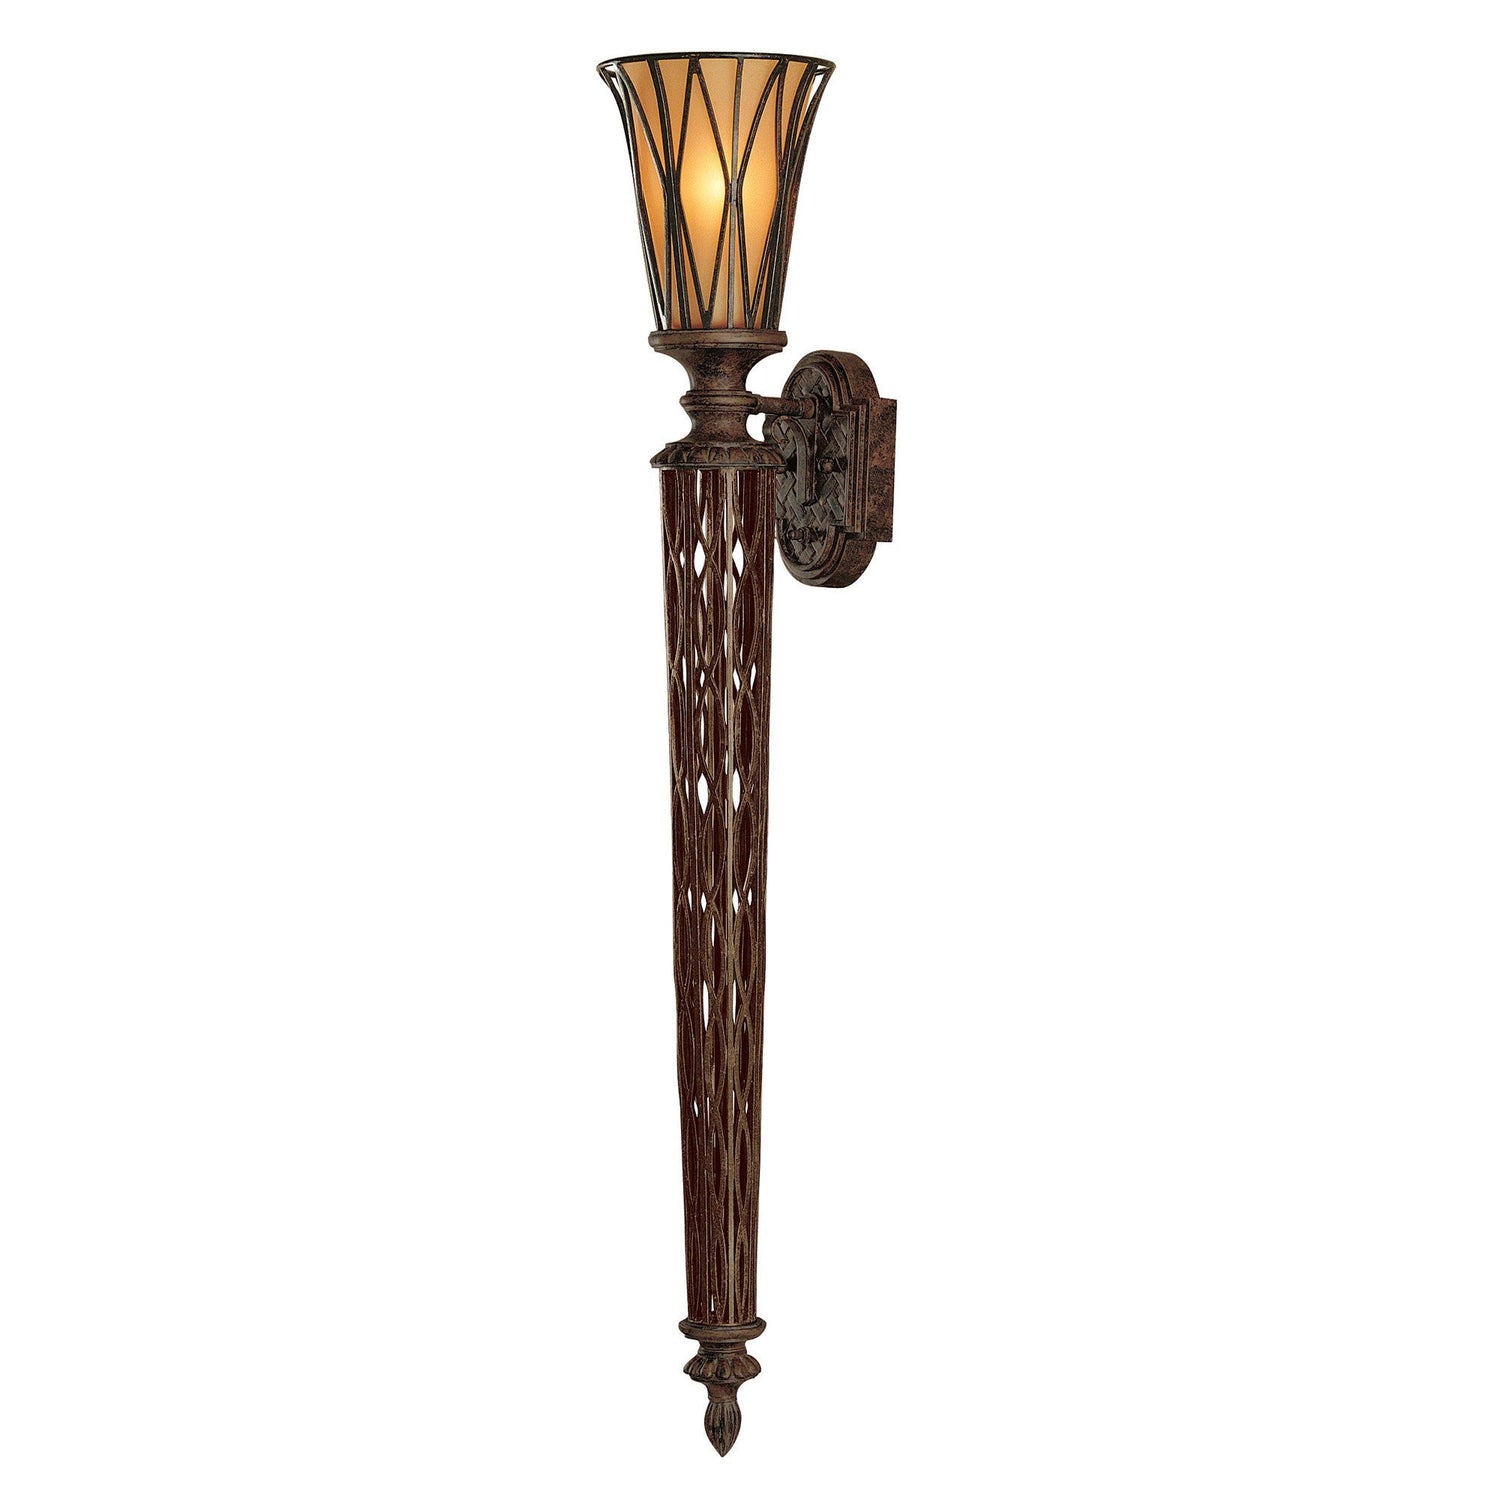 Feiss Triomphe Wall Torchiere Light - London Lighting - 1